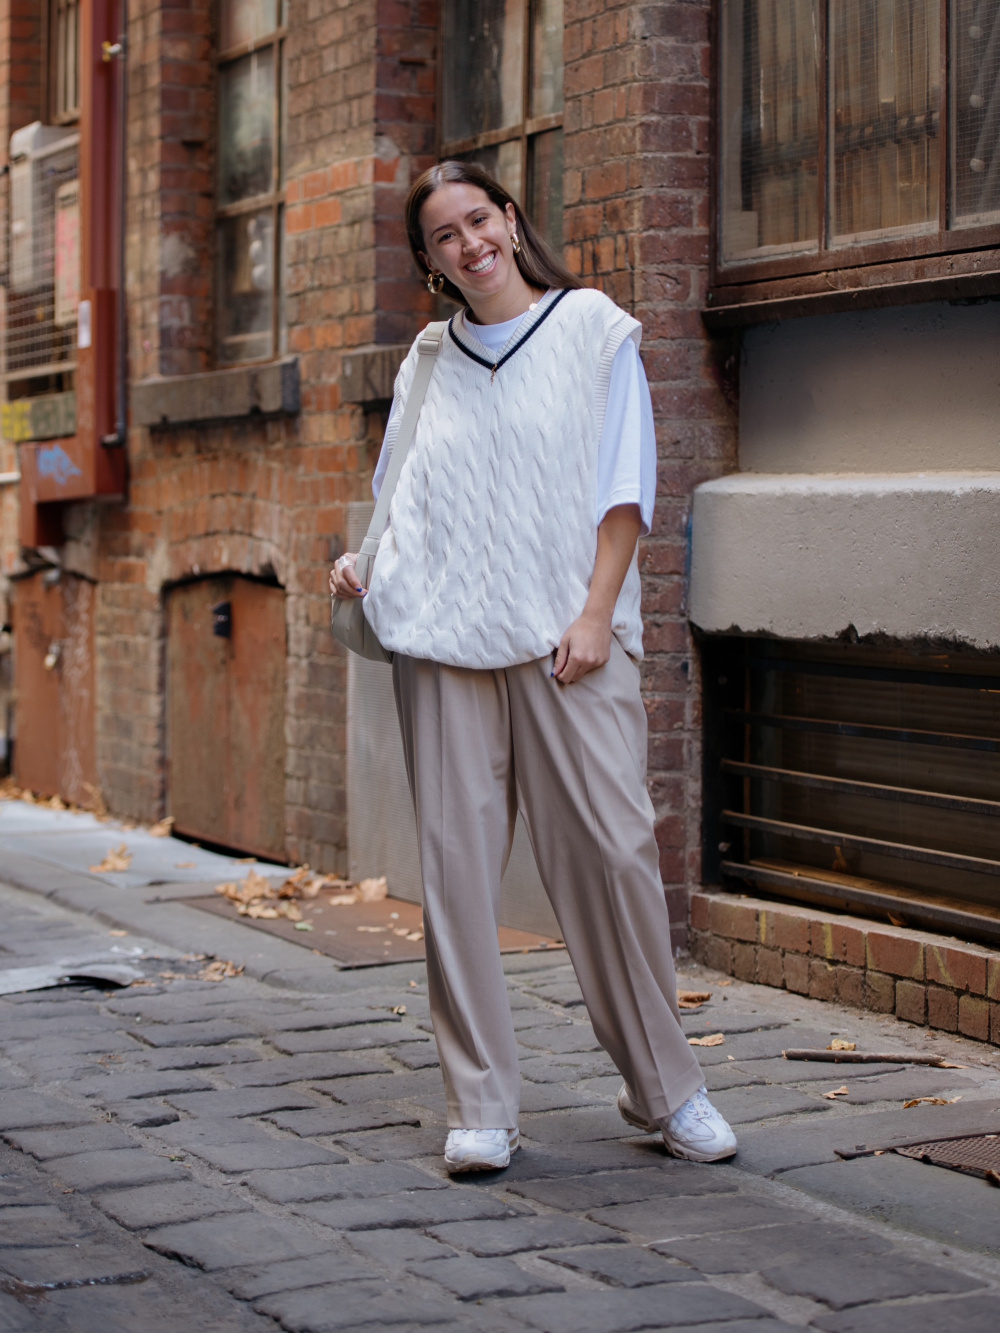 Check styling ideas for「SOUFFLE YARN LONG SLEEVE HIGH NECK SWEATER、PLEATED  WIDE PANTS」